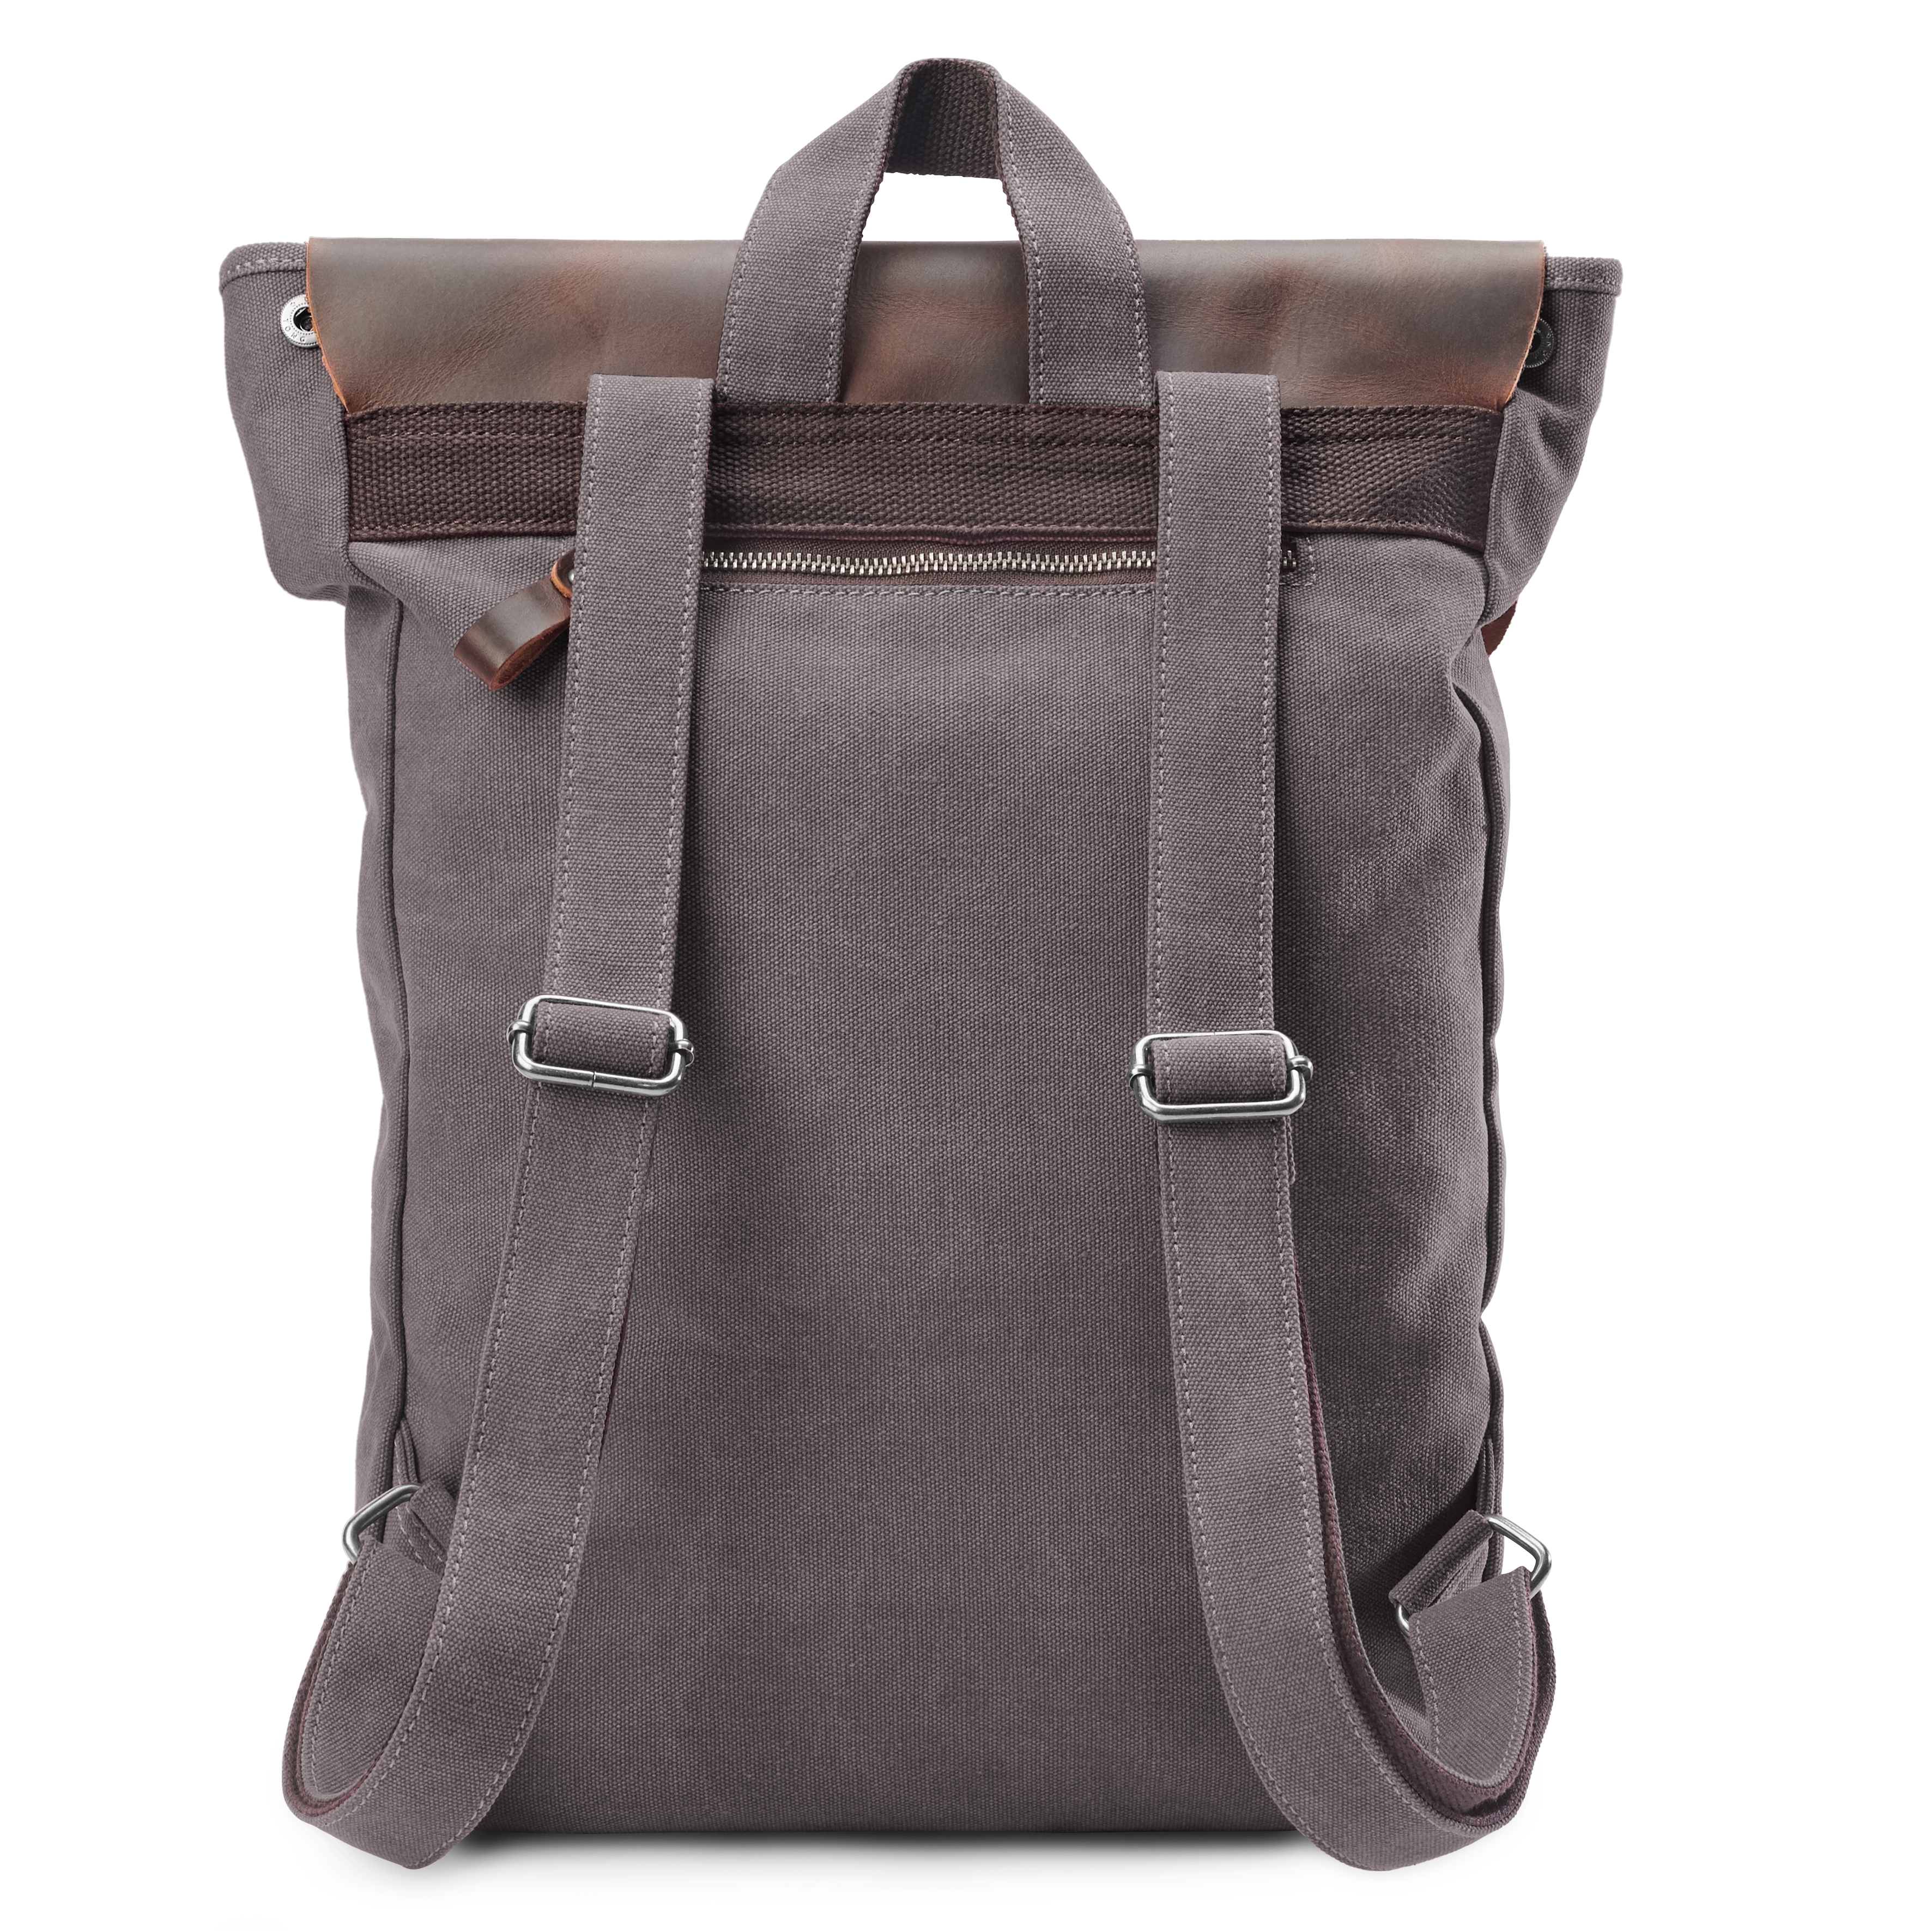 Vintage-Style Graphite Leather & Canvas Backpack - for Men - Delton Bags